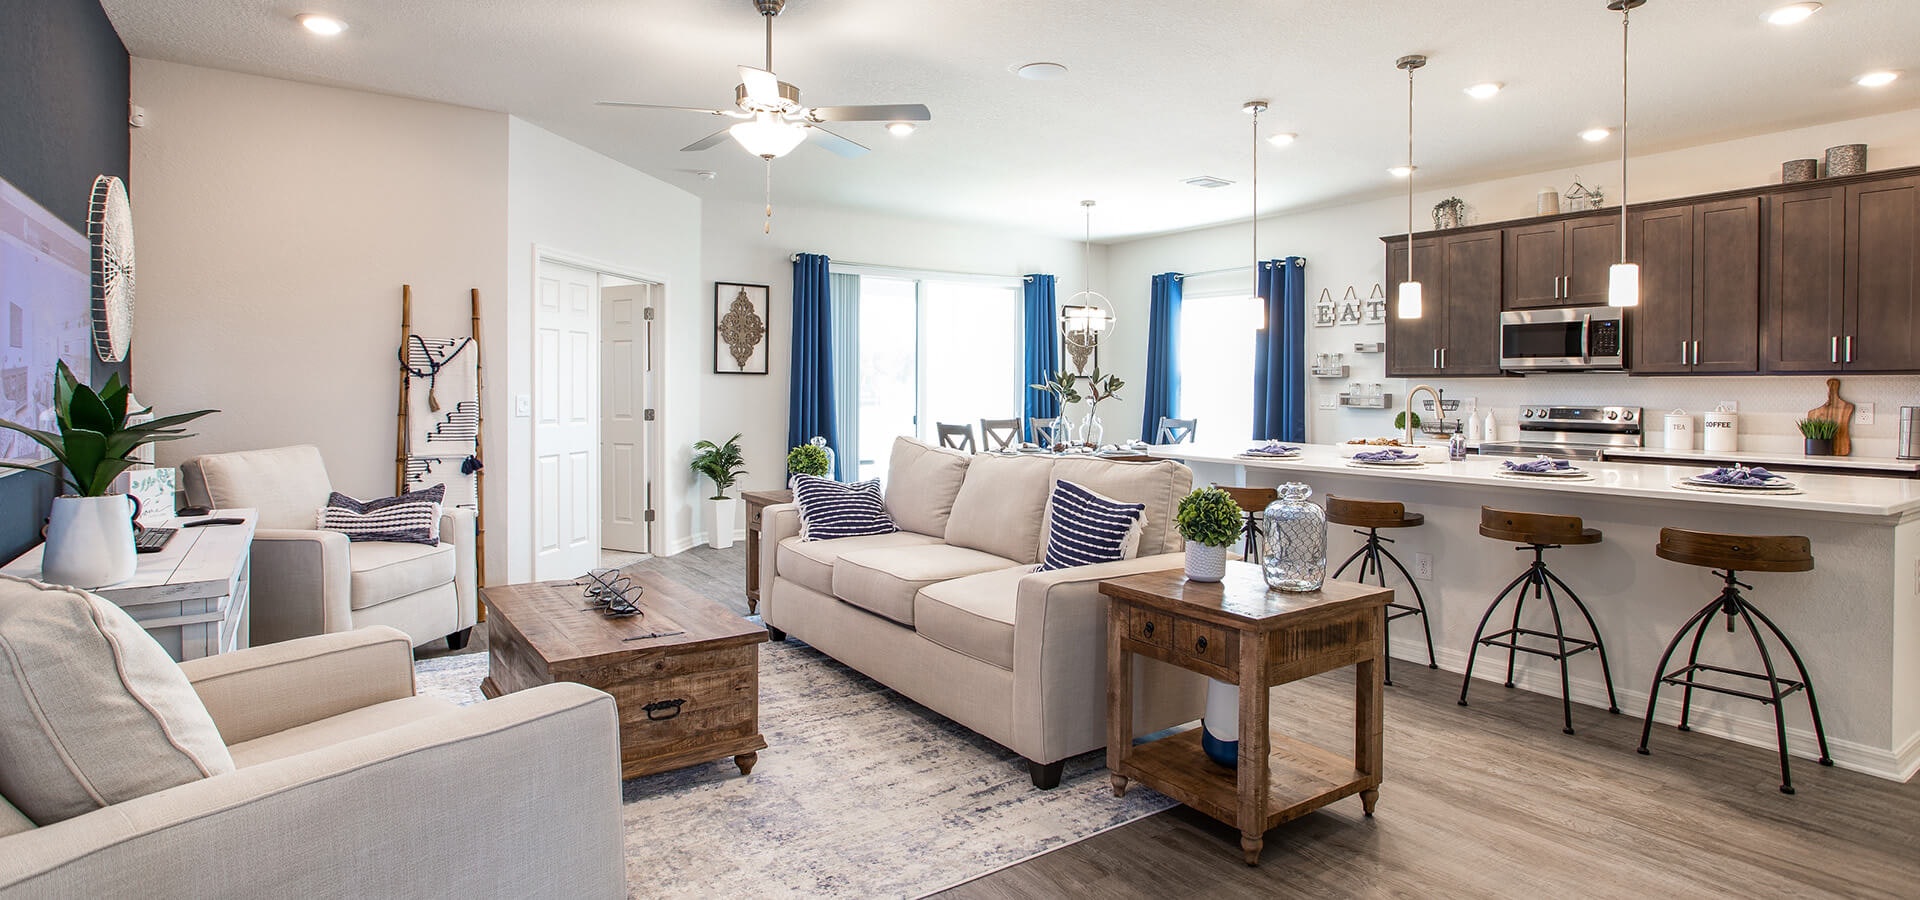 The Shelby, a new construction home available in Silver Springs Shores in Ocala